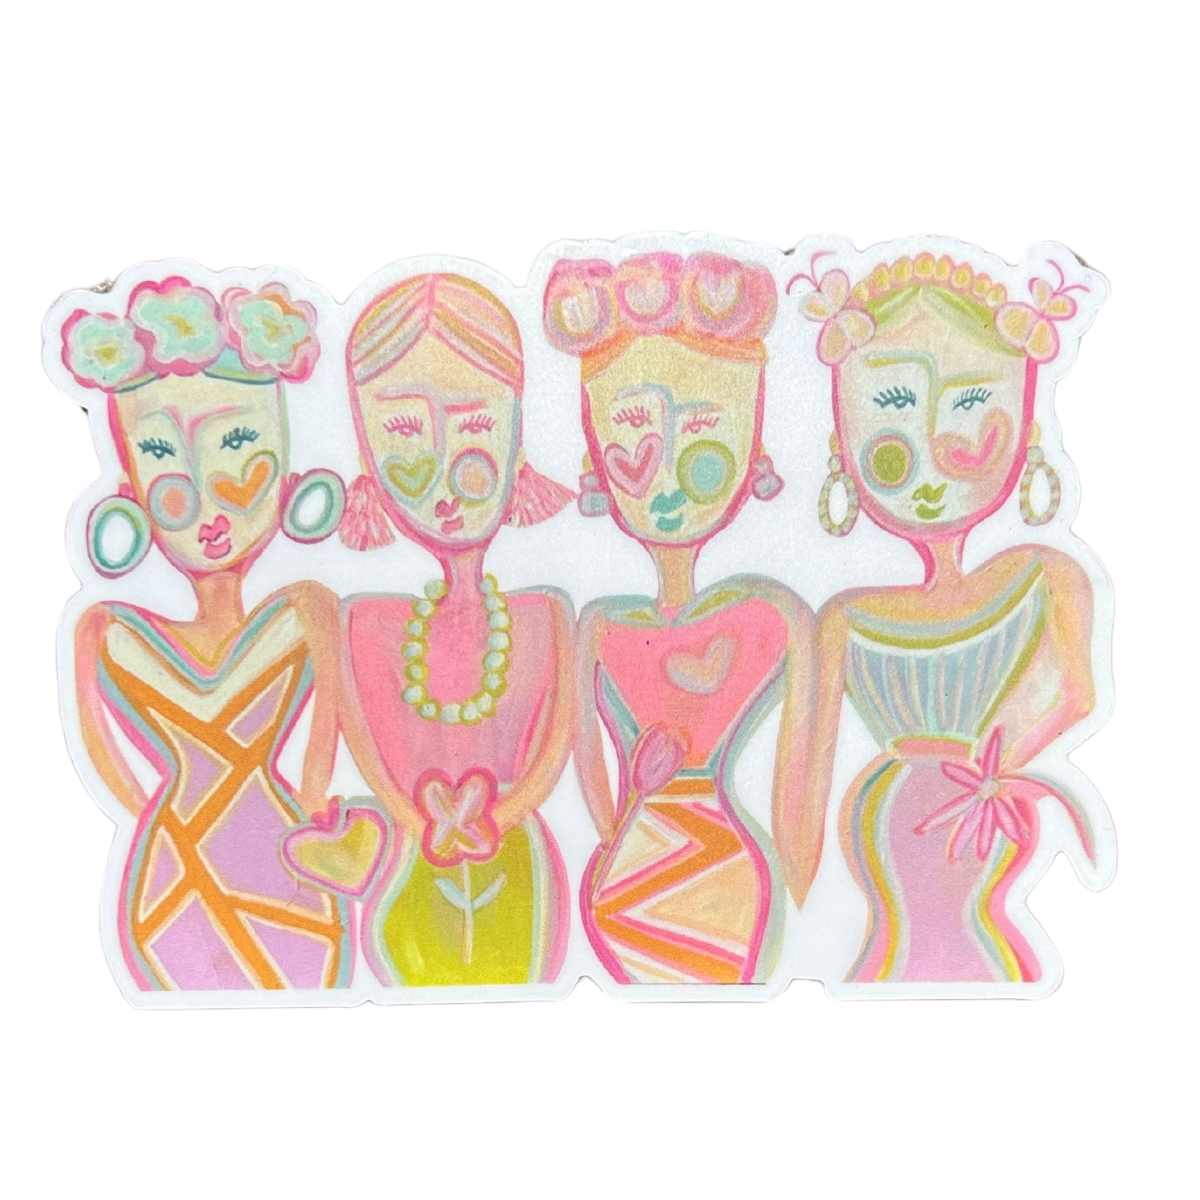 “Sisters at Heart" Sticker